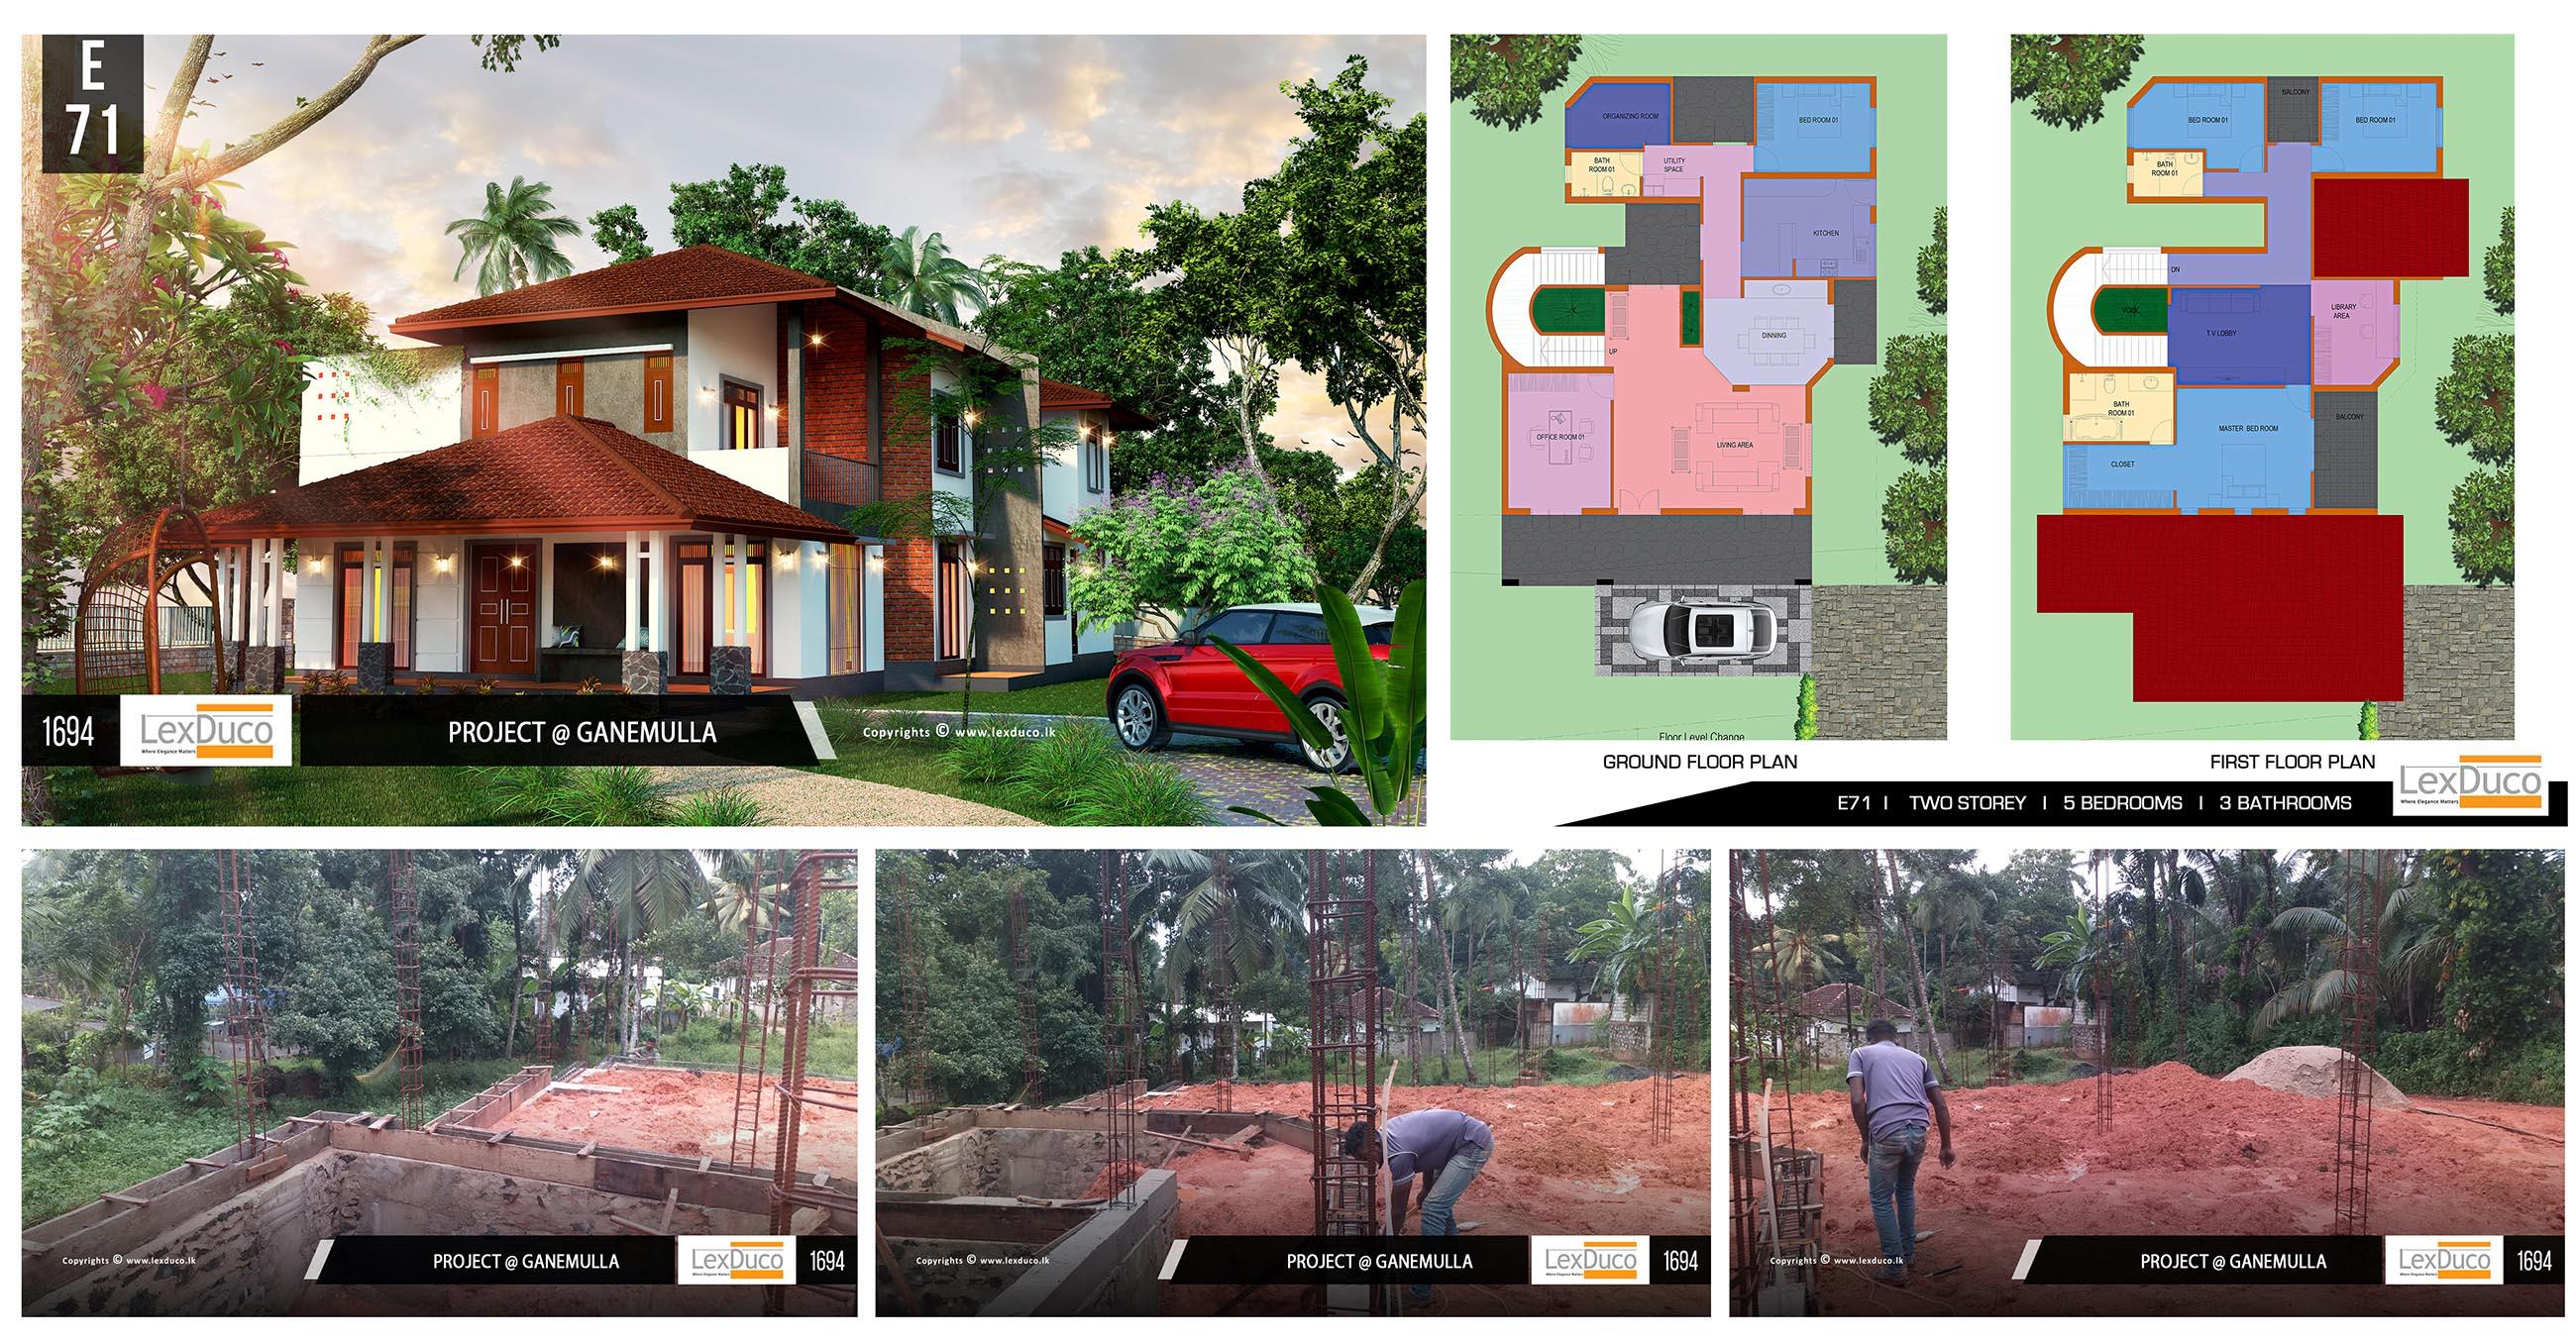 Residential Housing Project at Ganemulla | Lex Duco